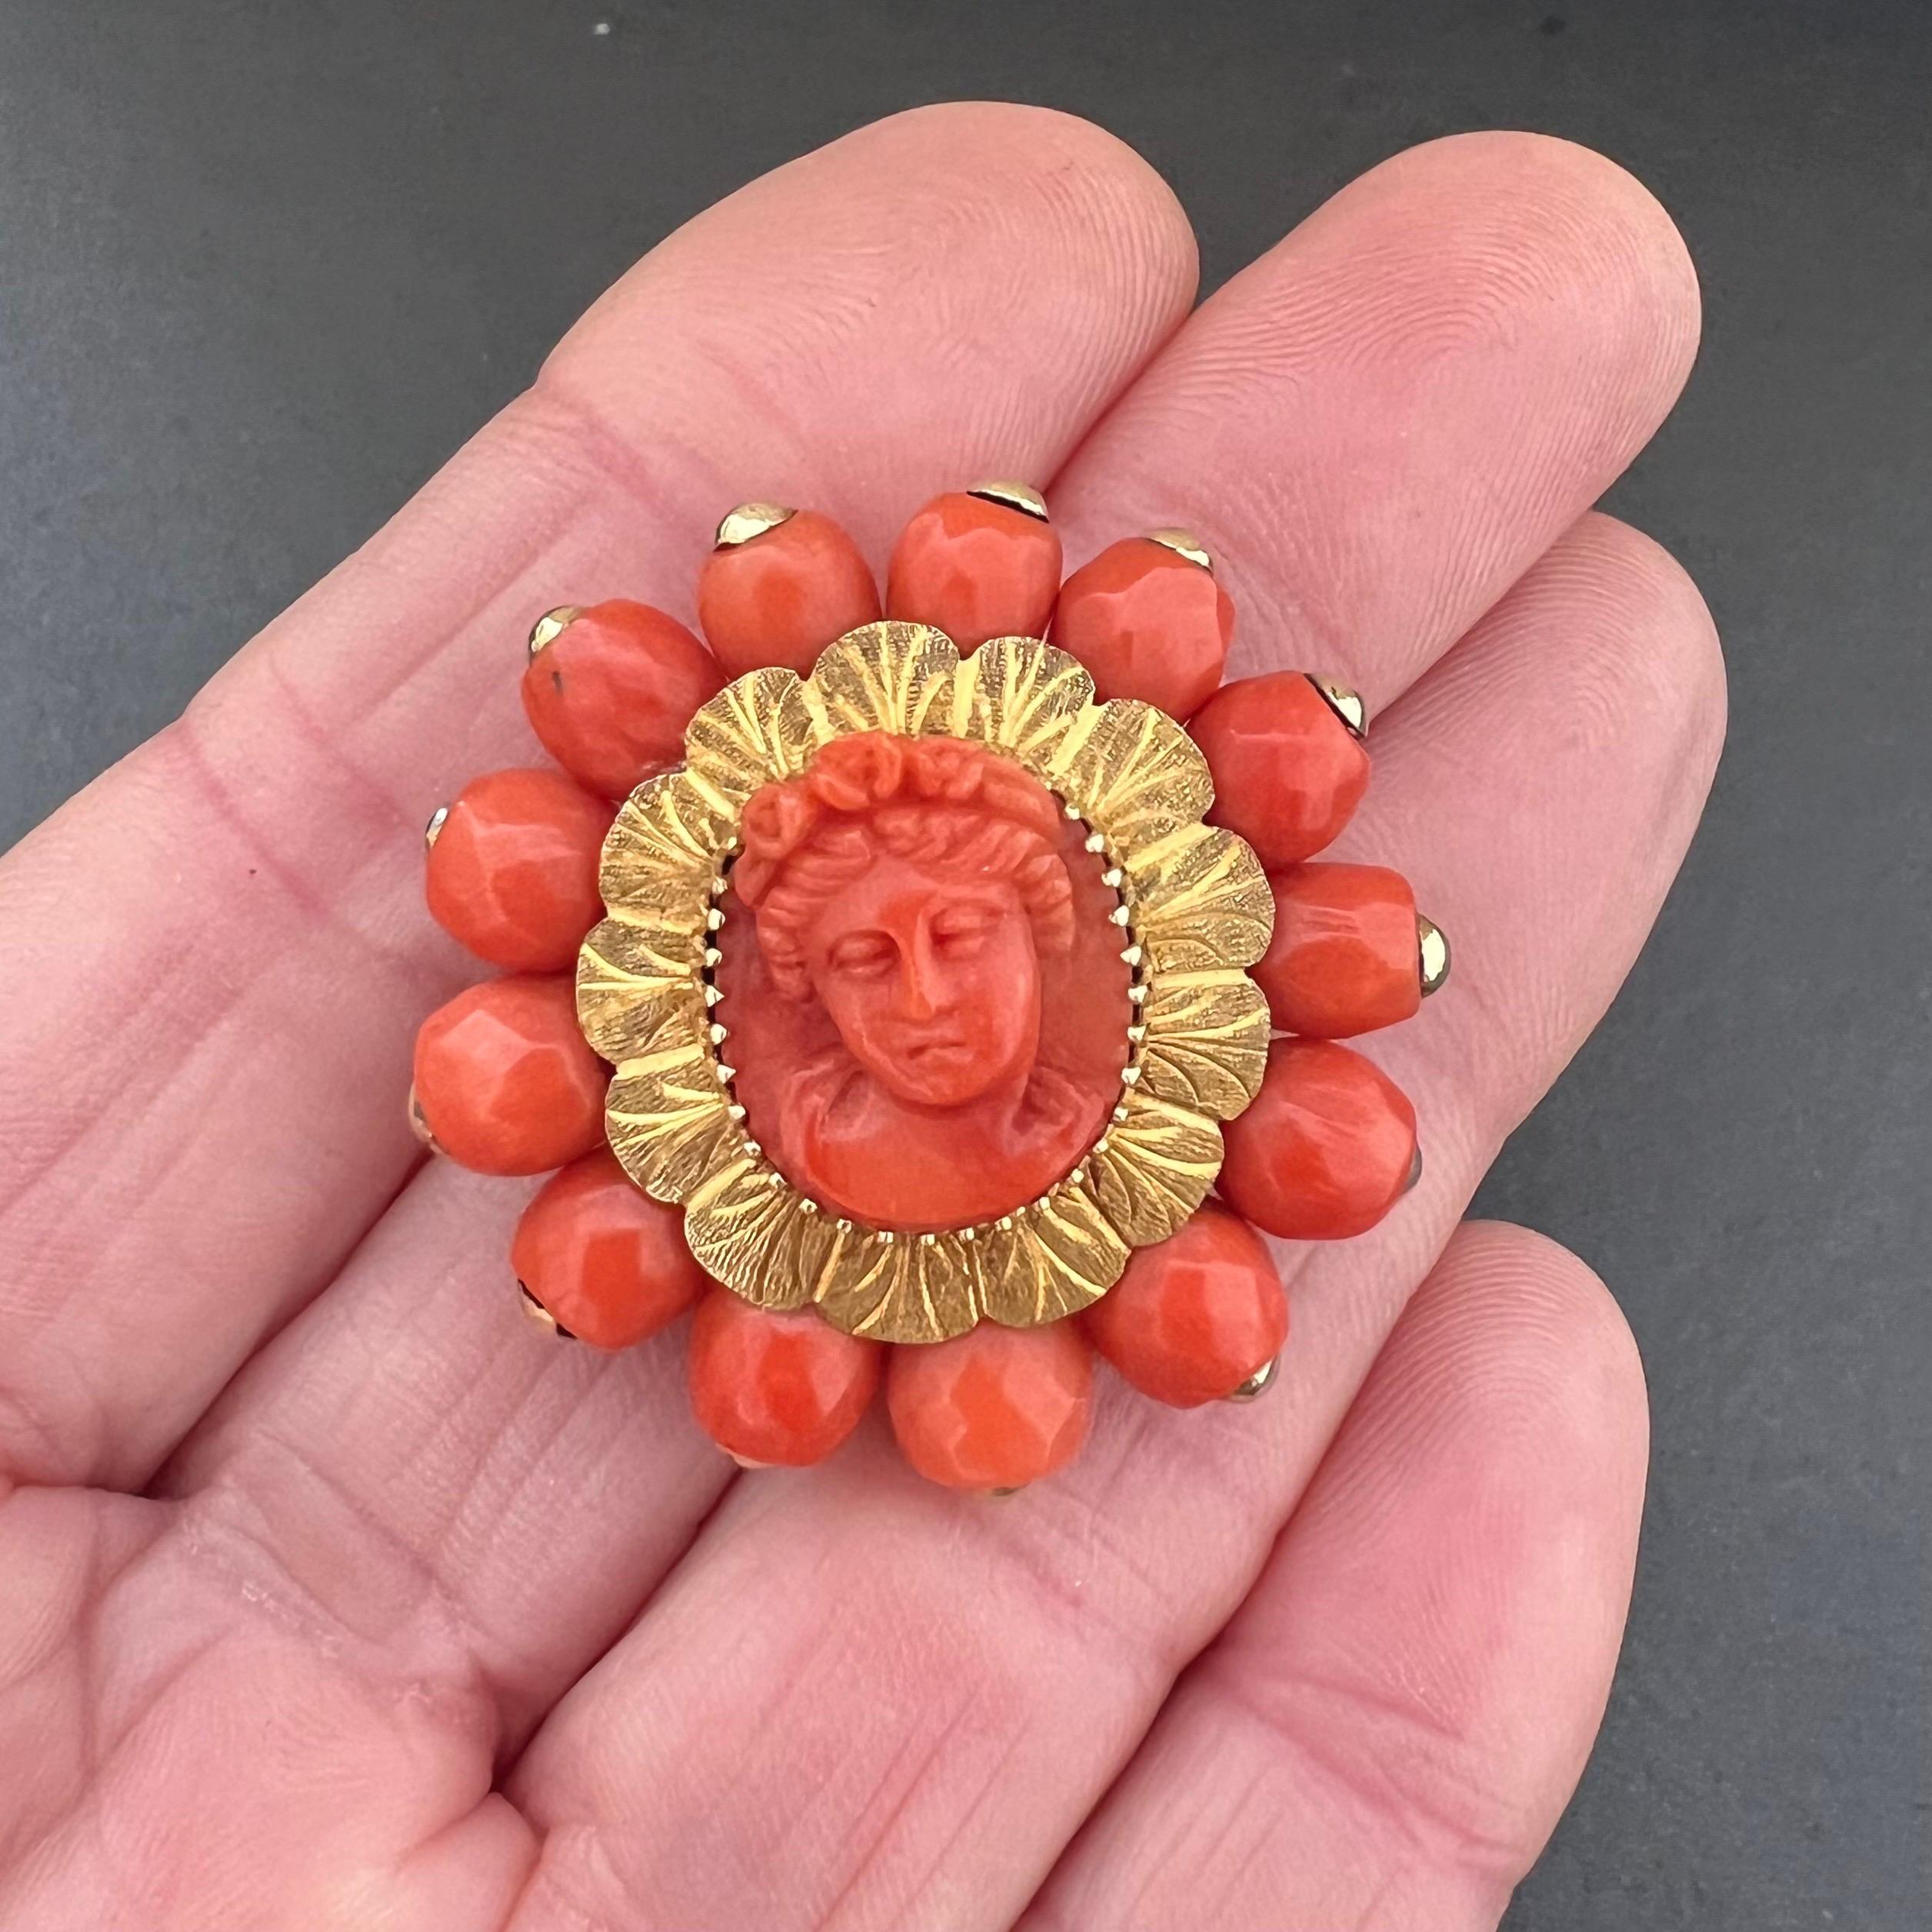 A beautiful 14 karat yellow gold hand-carved in high relief coral brooch set with a cameo in the center. The large coral beads on the edge are faceted and have a gold cap at the top and attached to the brooch. The beautifully carved oval cameo shows